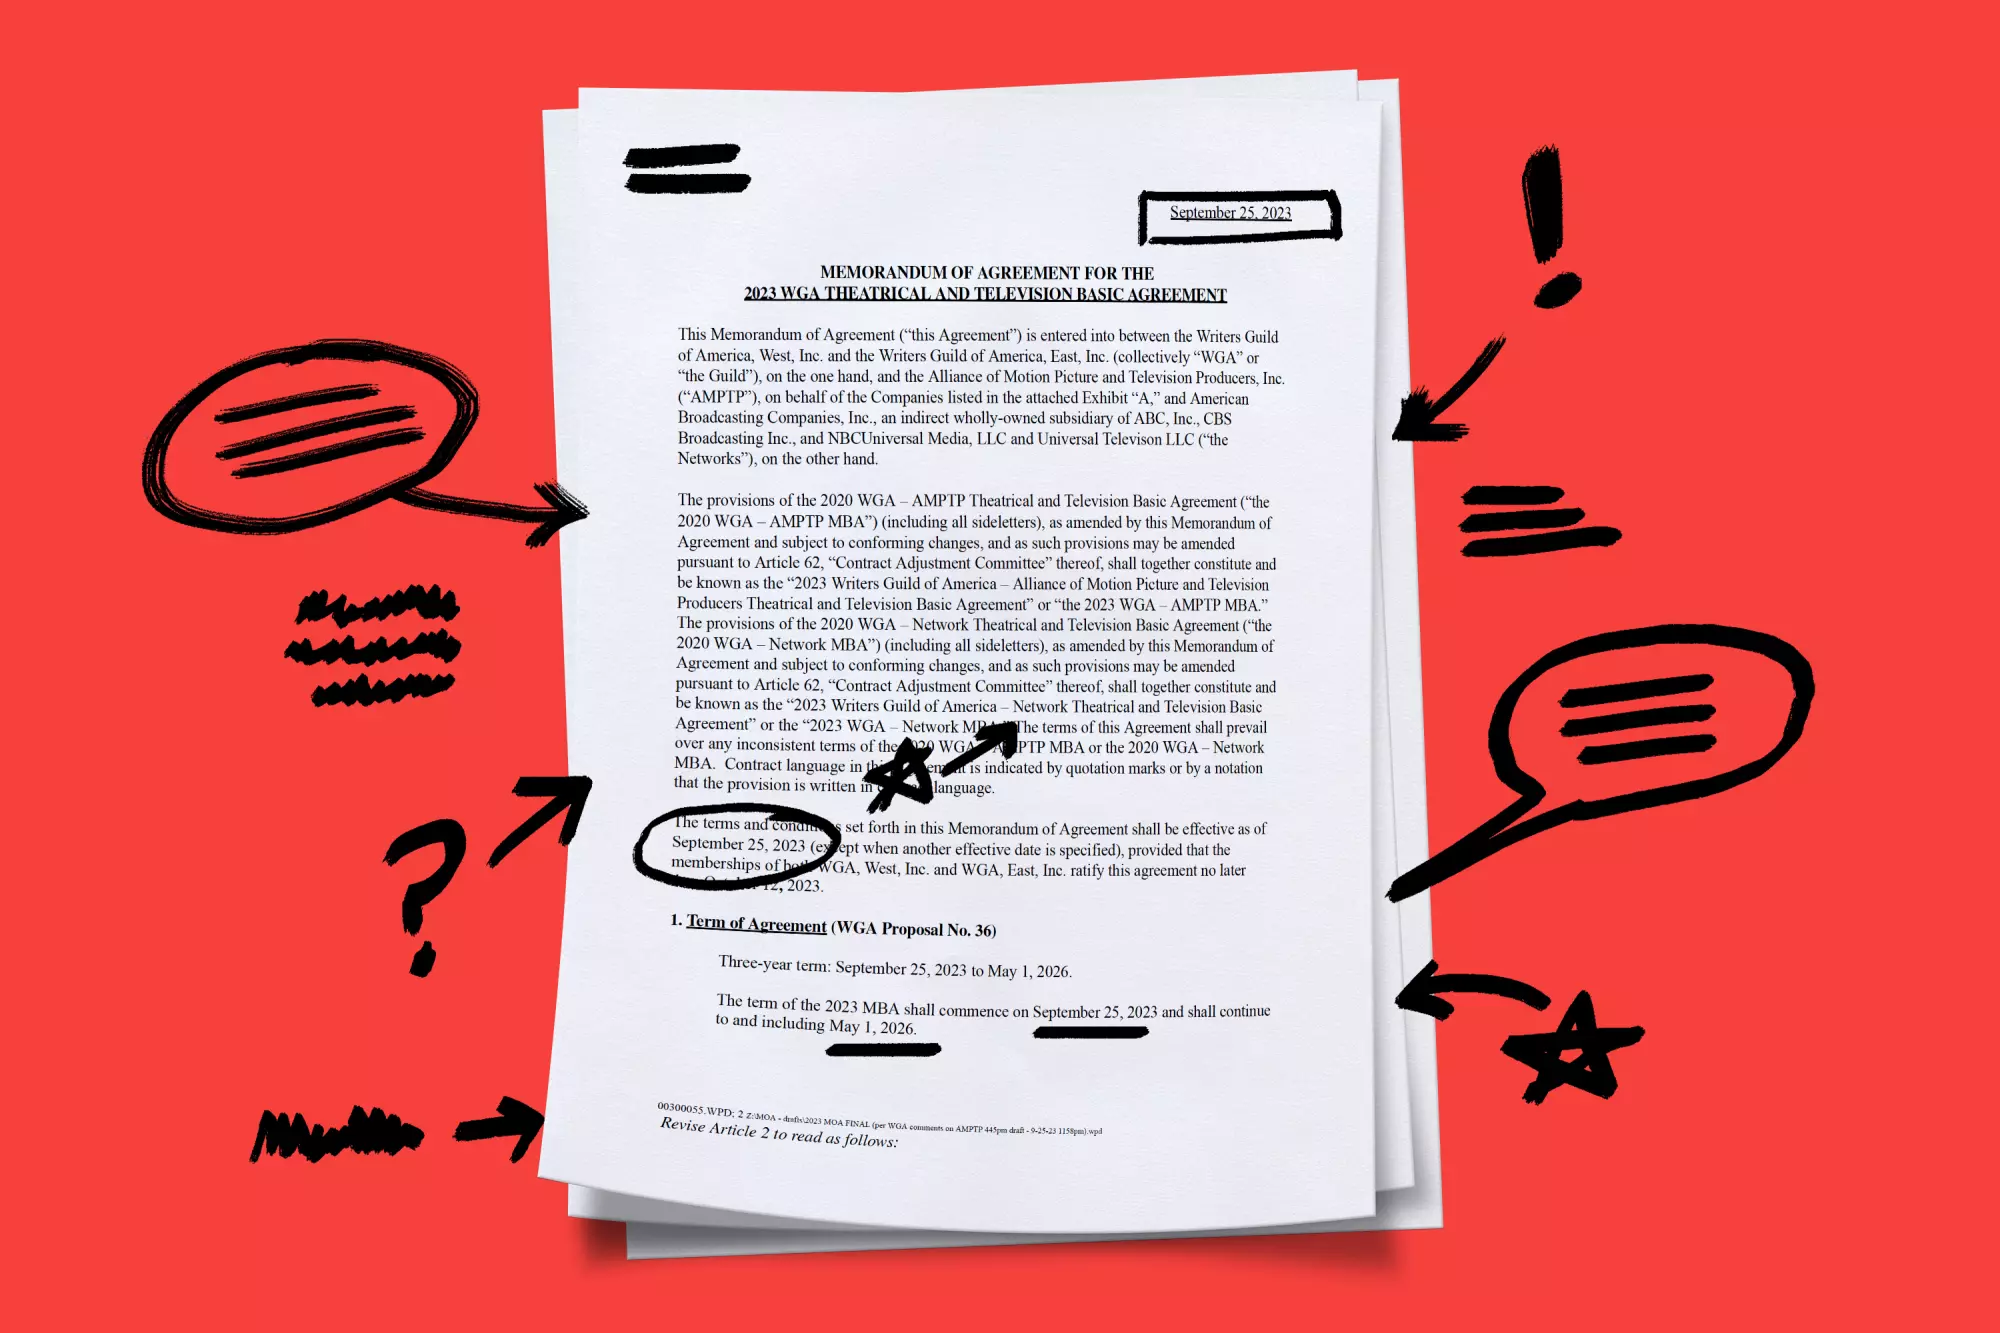 Photo illustration of annotated agreement document.